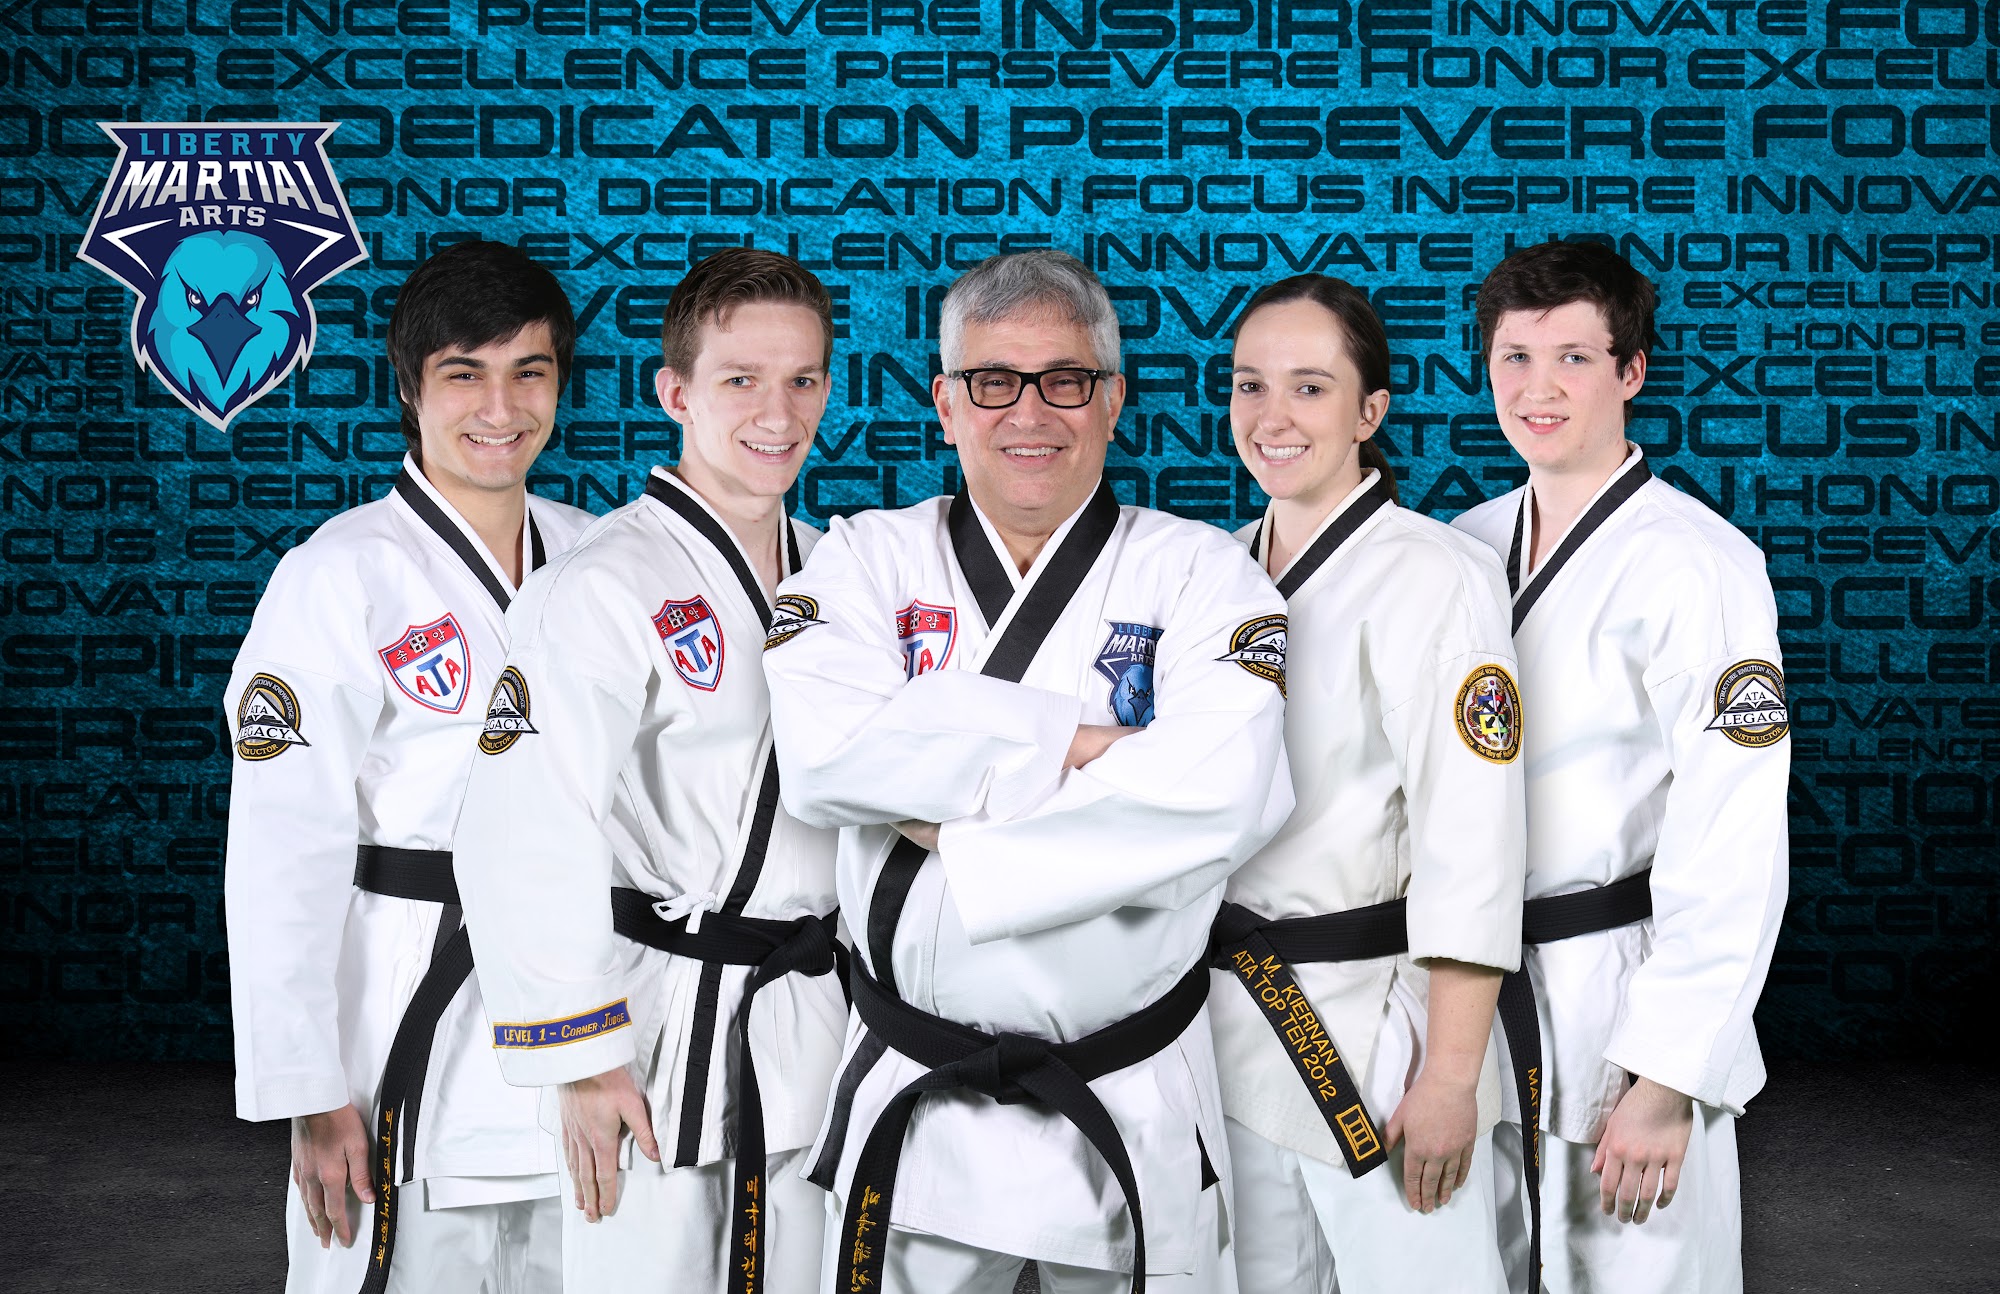 Liberty Martial Arts 33 Princeton Hightstown Rd, Princeton Junction New Jersey 08550